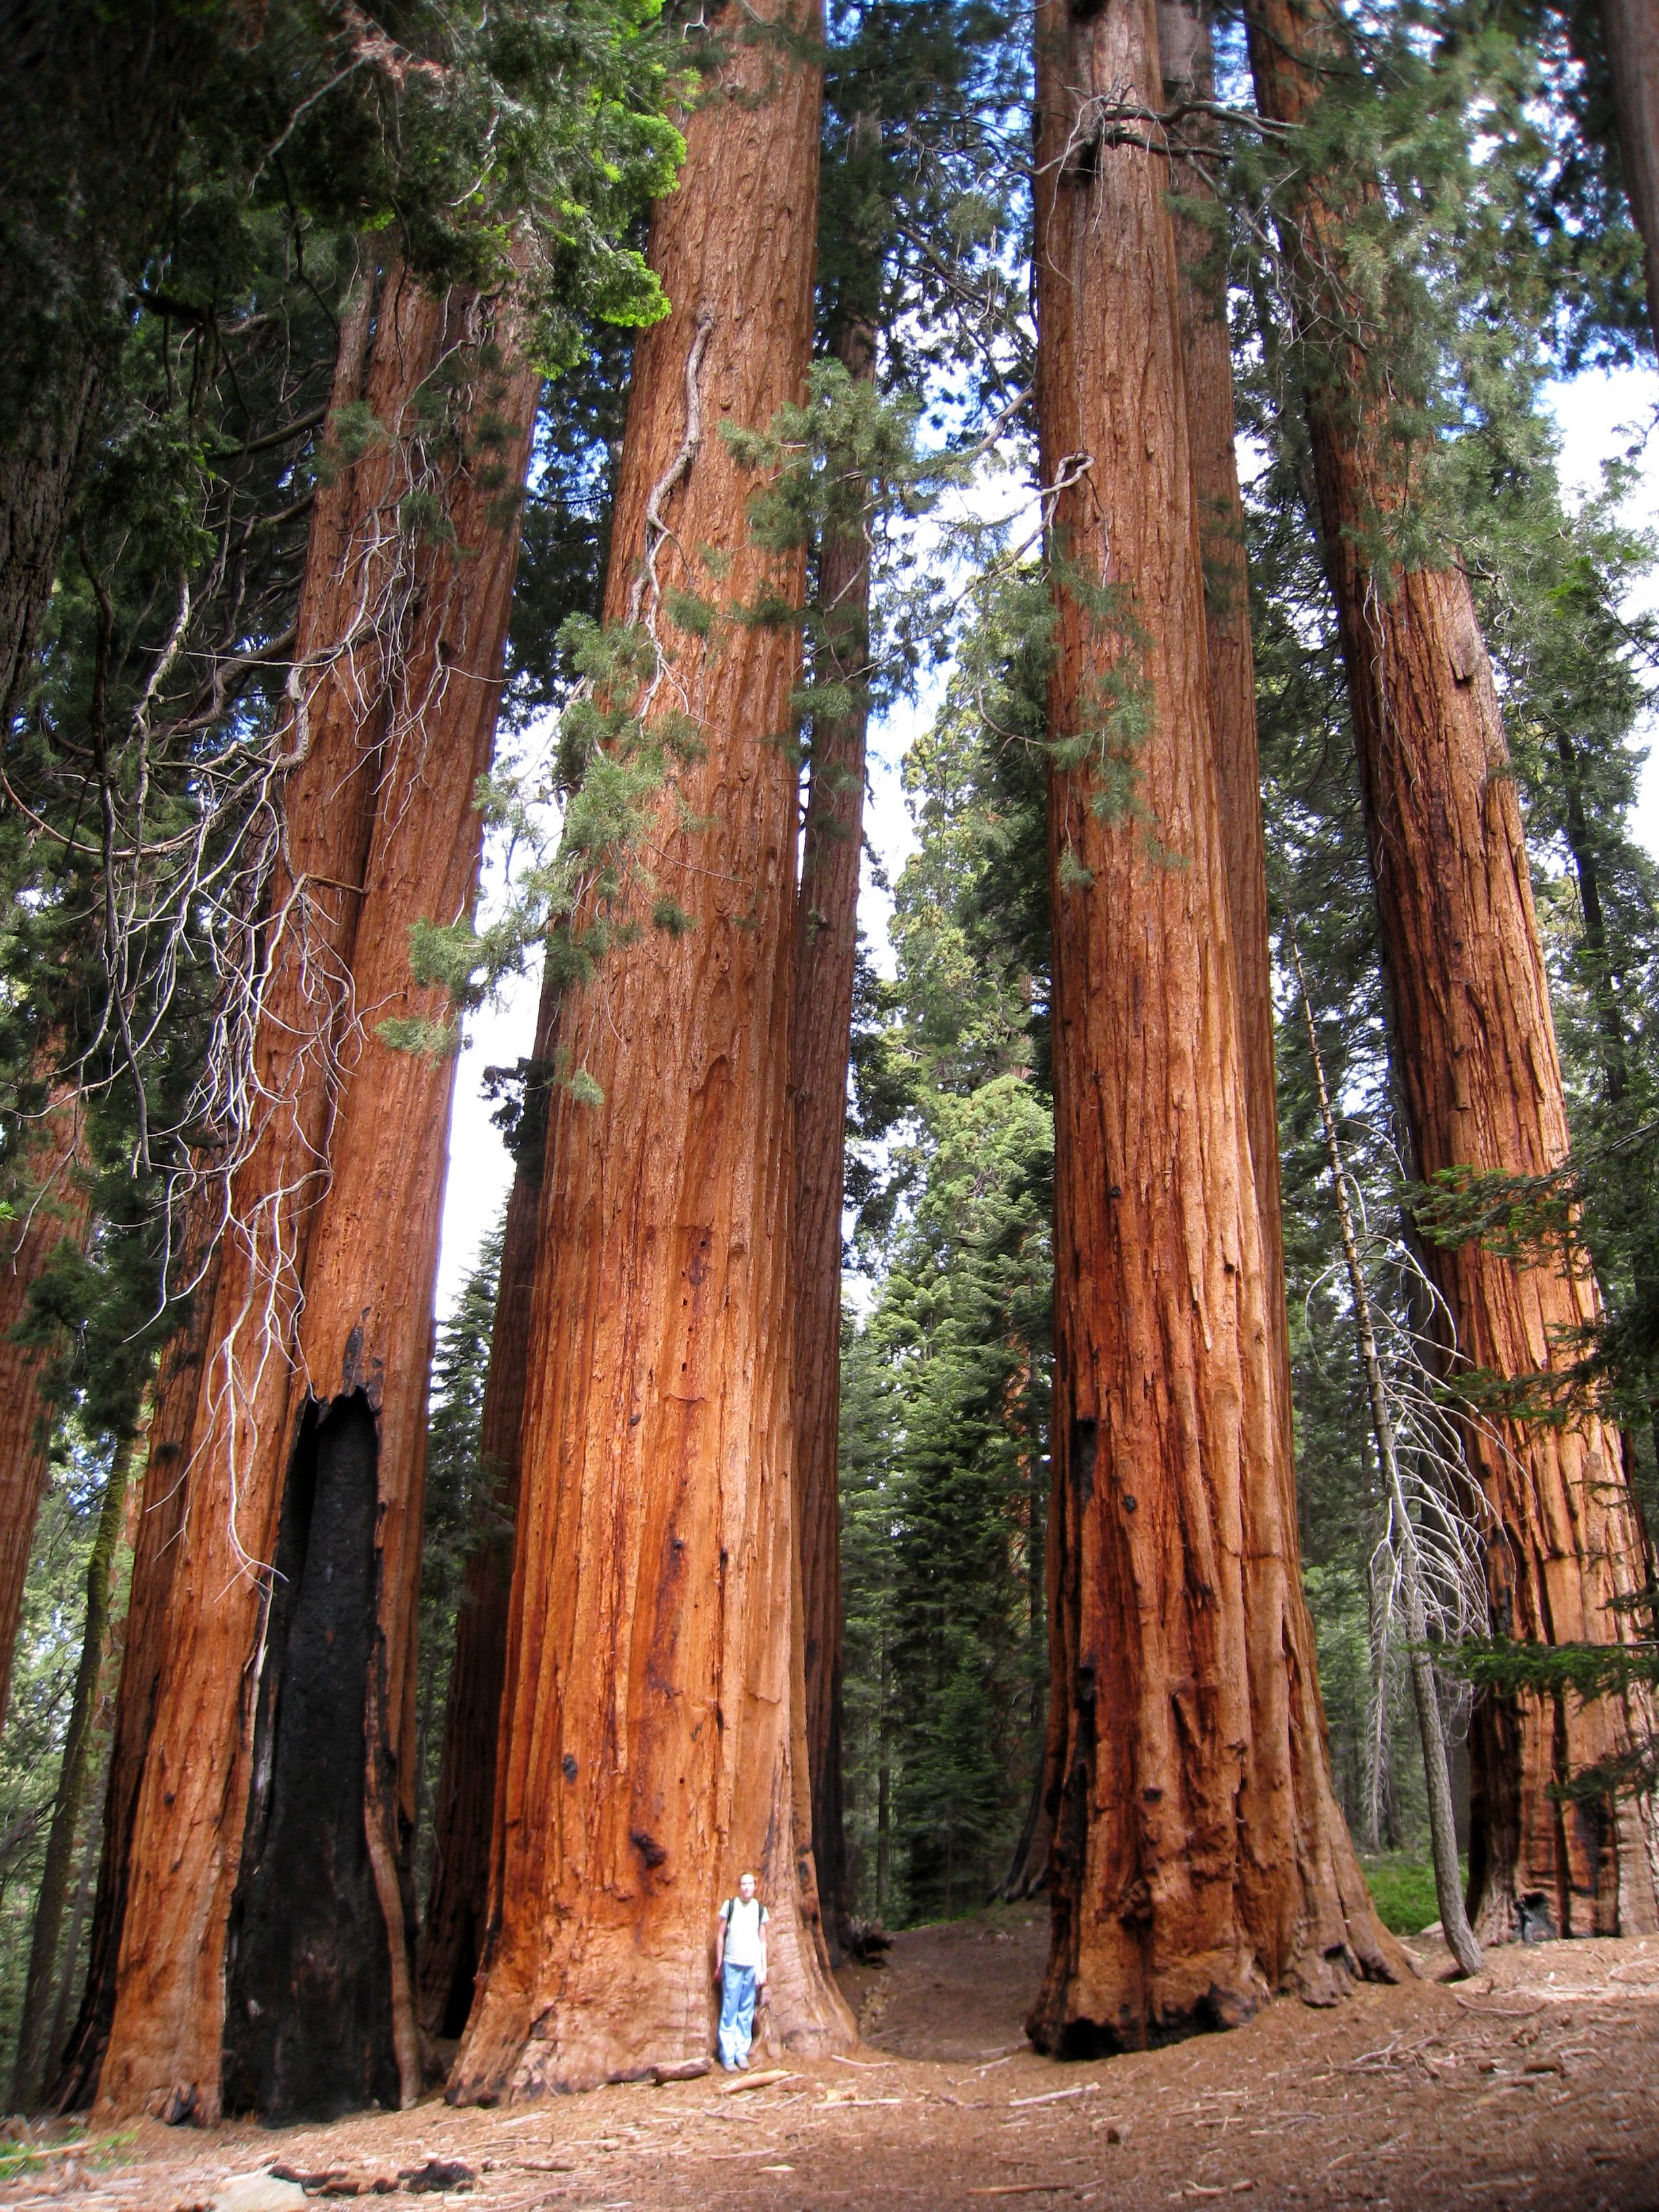 Redwood National And States Park Is A Huge Protected Area In